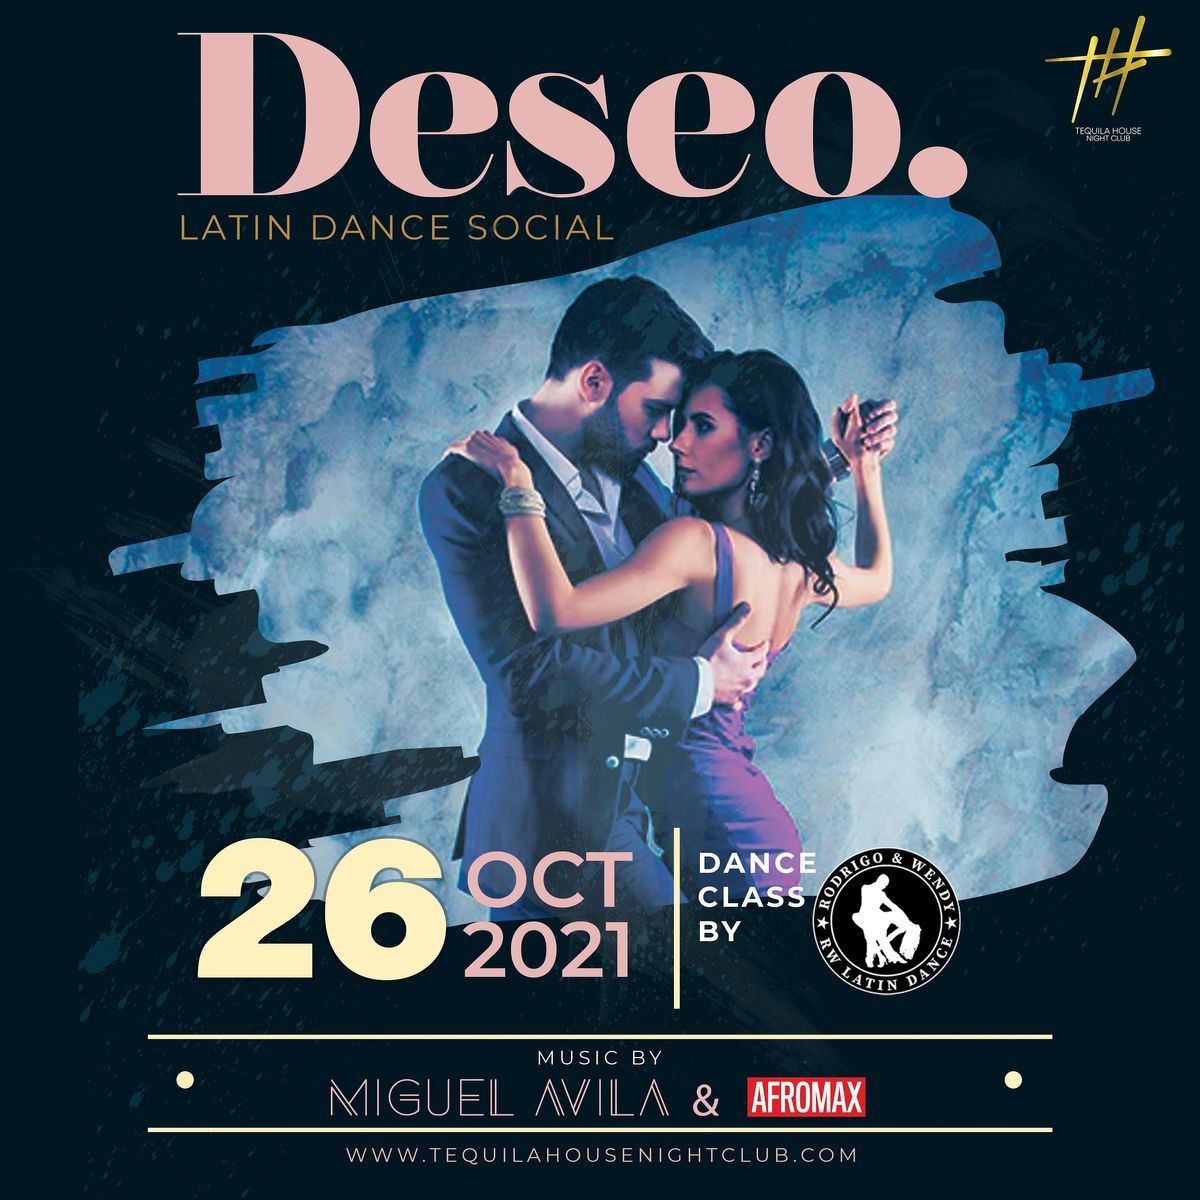 DESEO. Latin Dance Social @ Tequila House (Oct. 26)